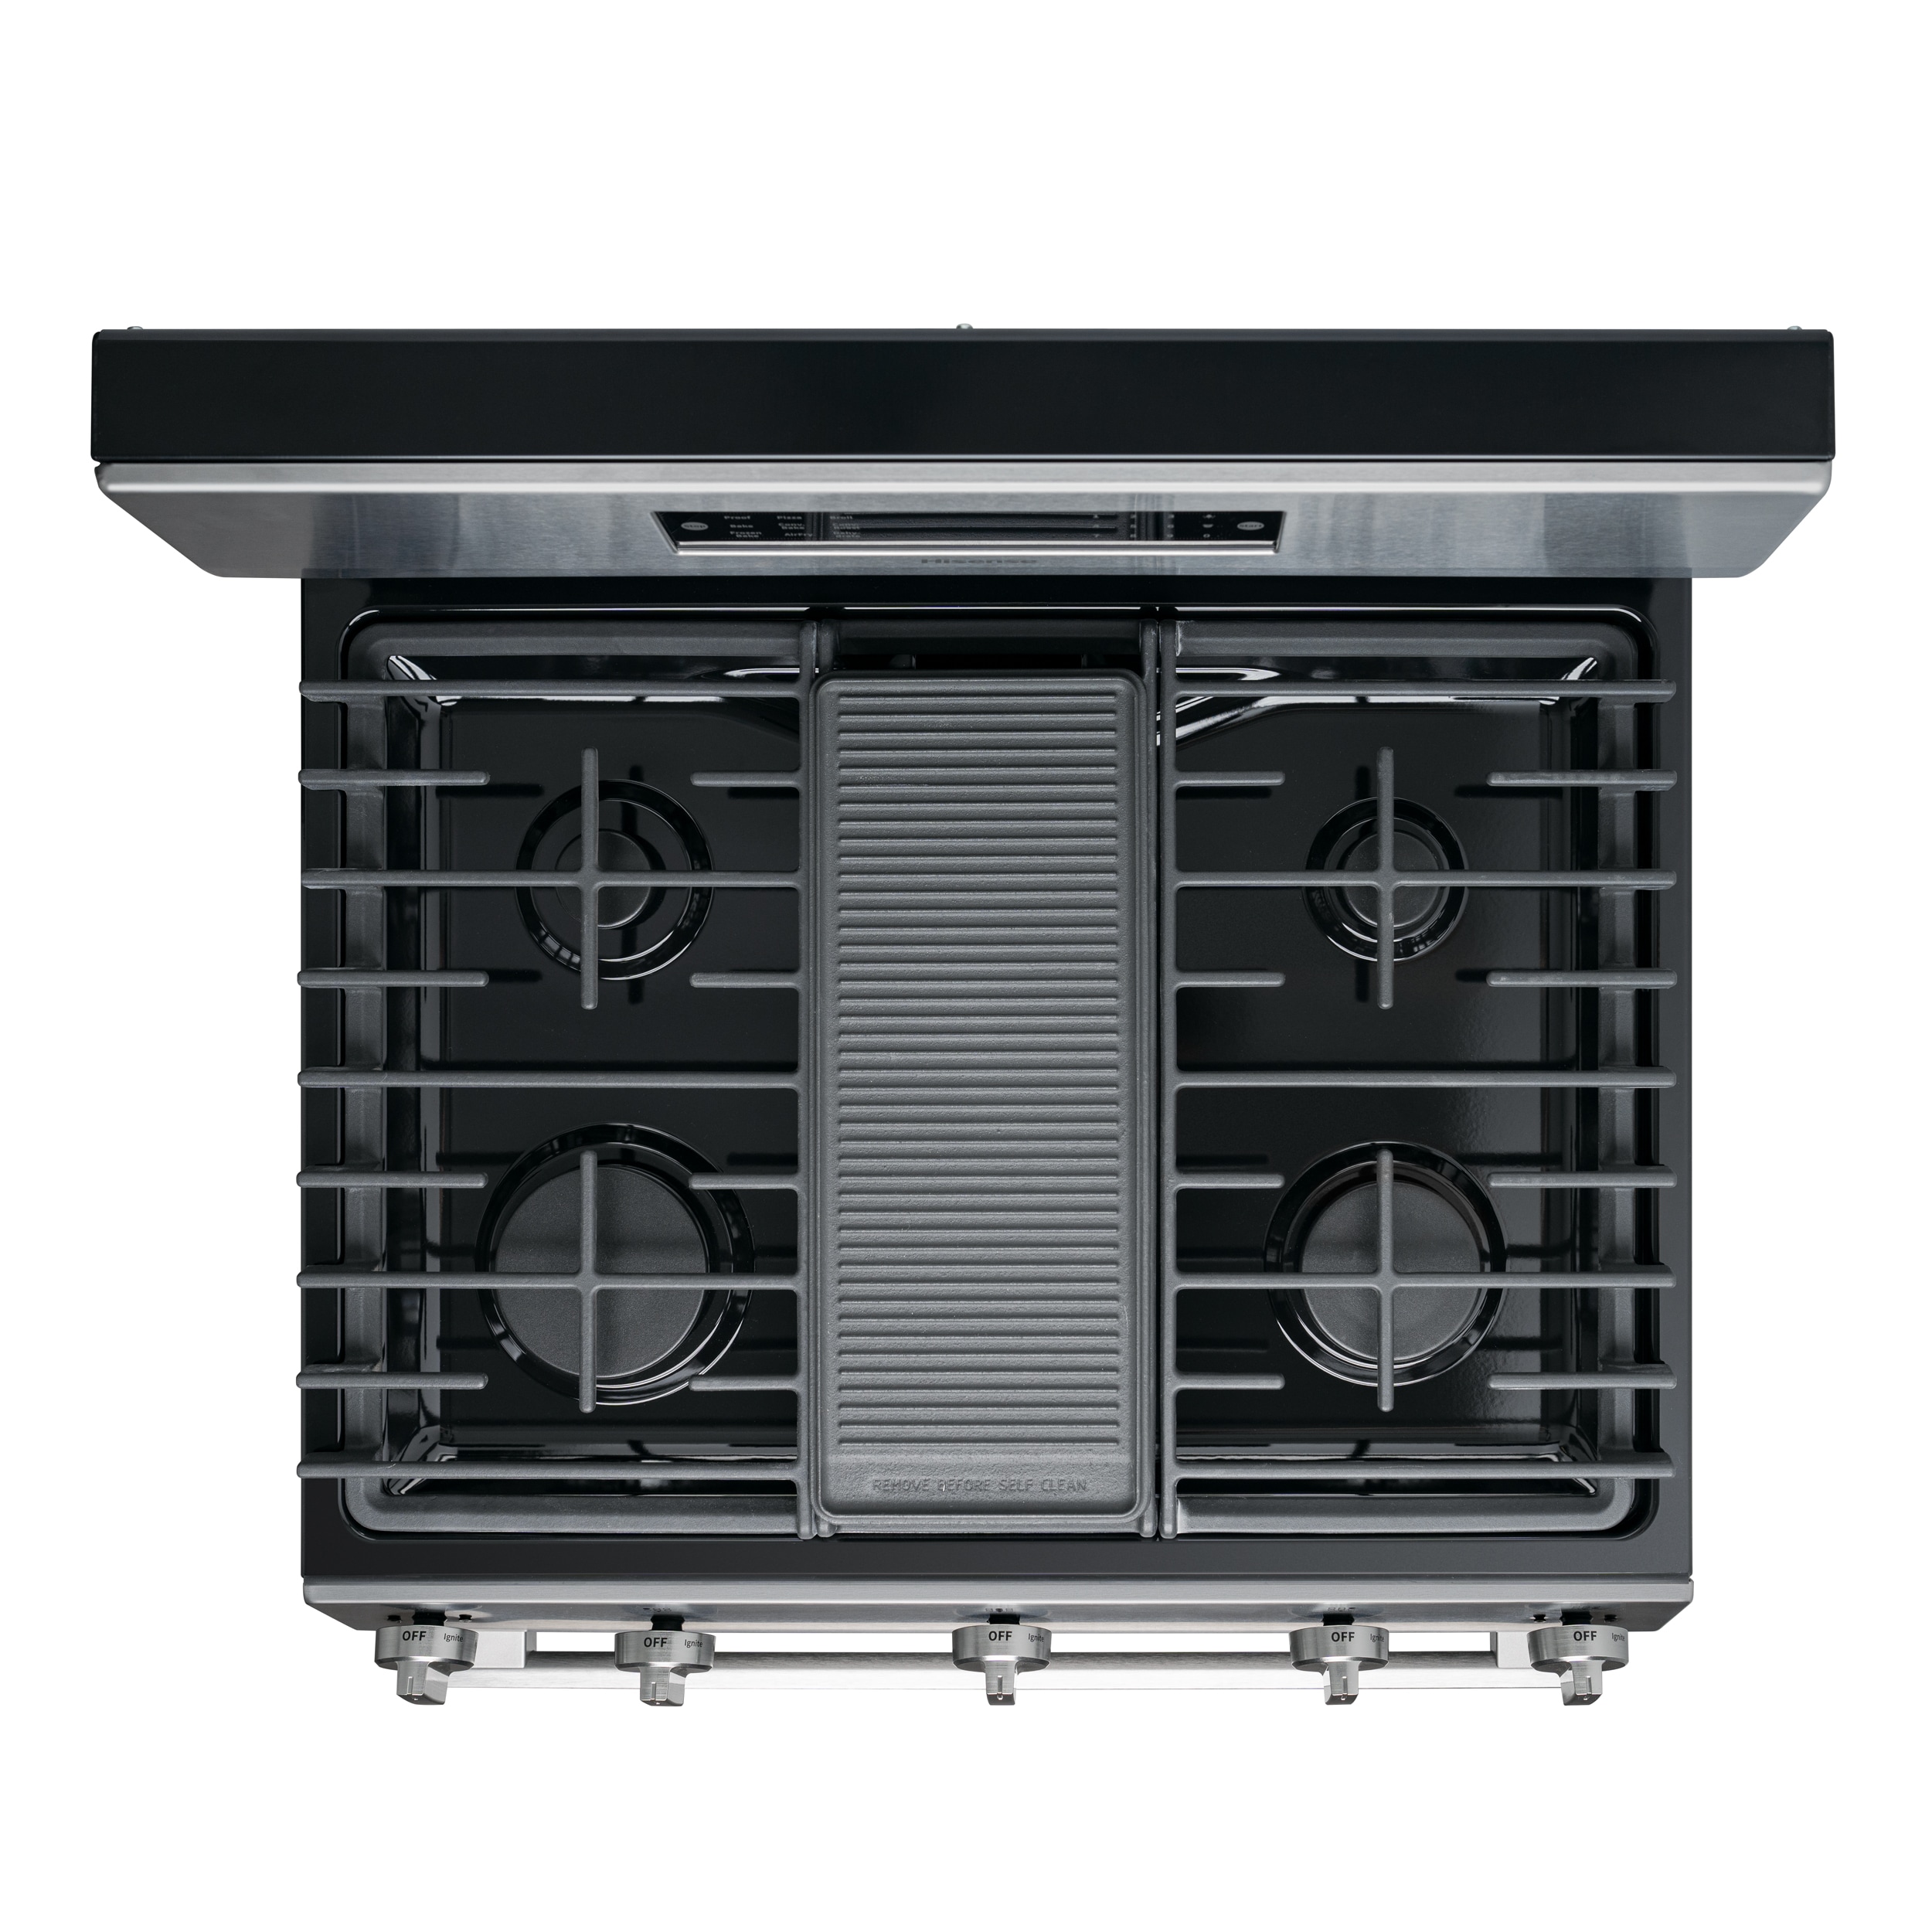 Appliance makers know how to make a cleaner natural gas stove